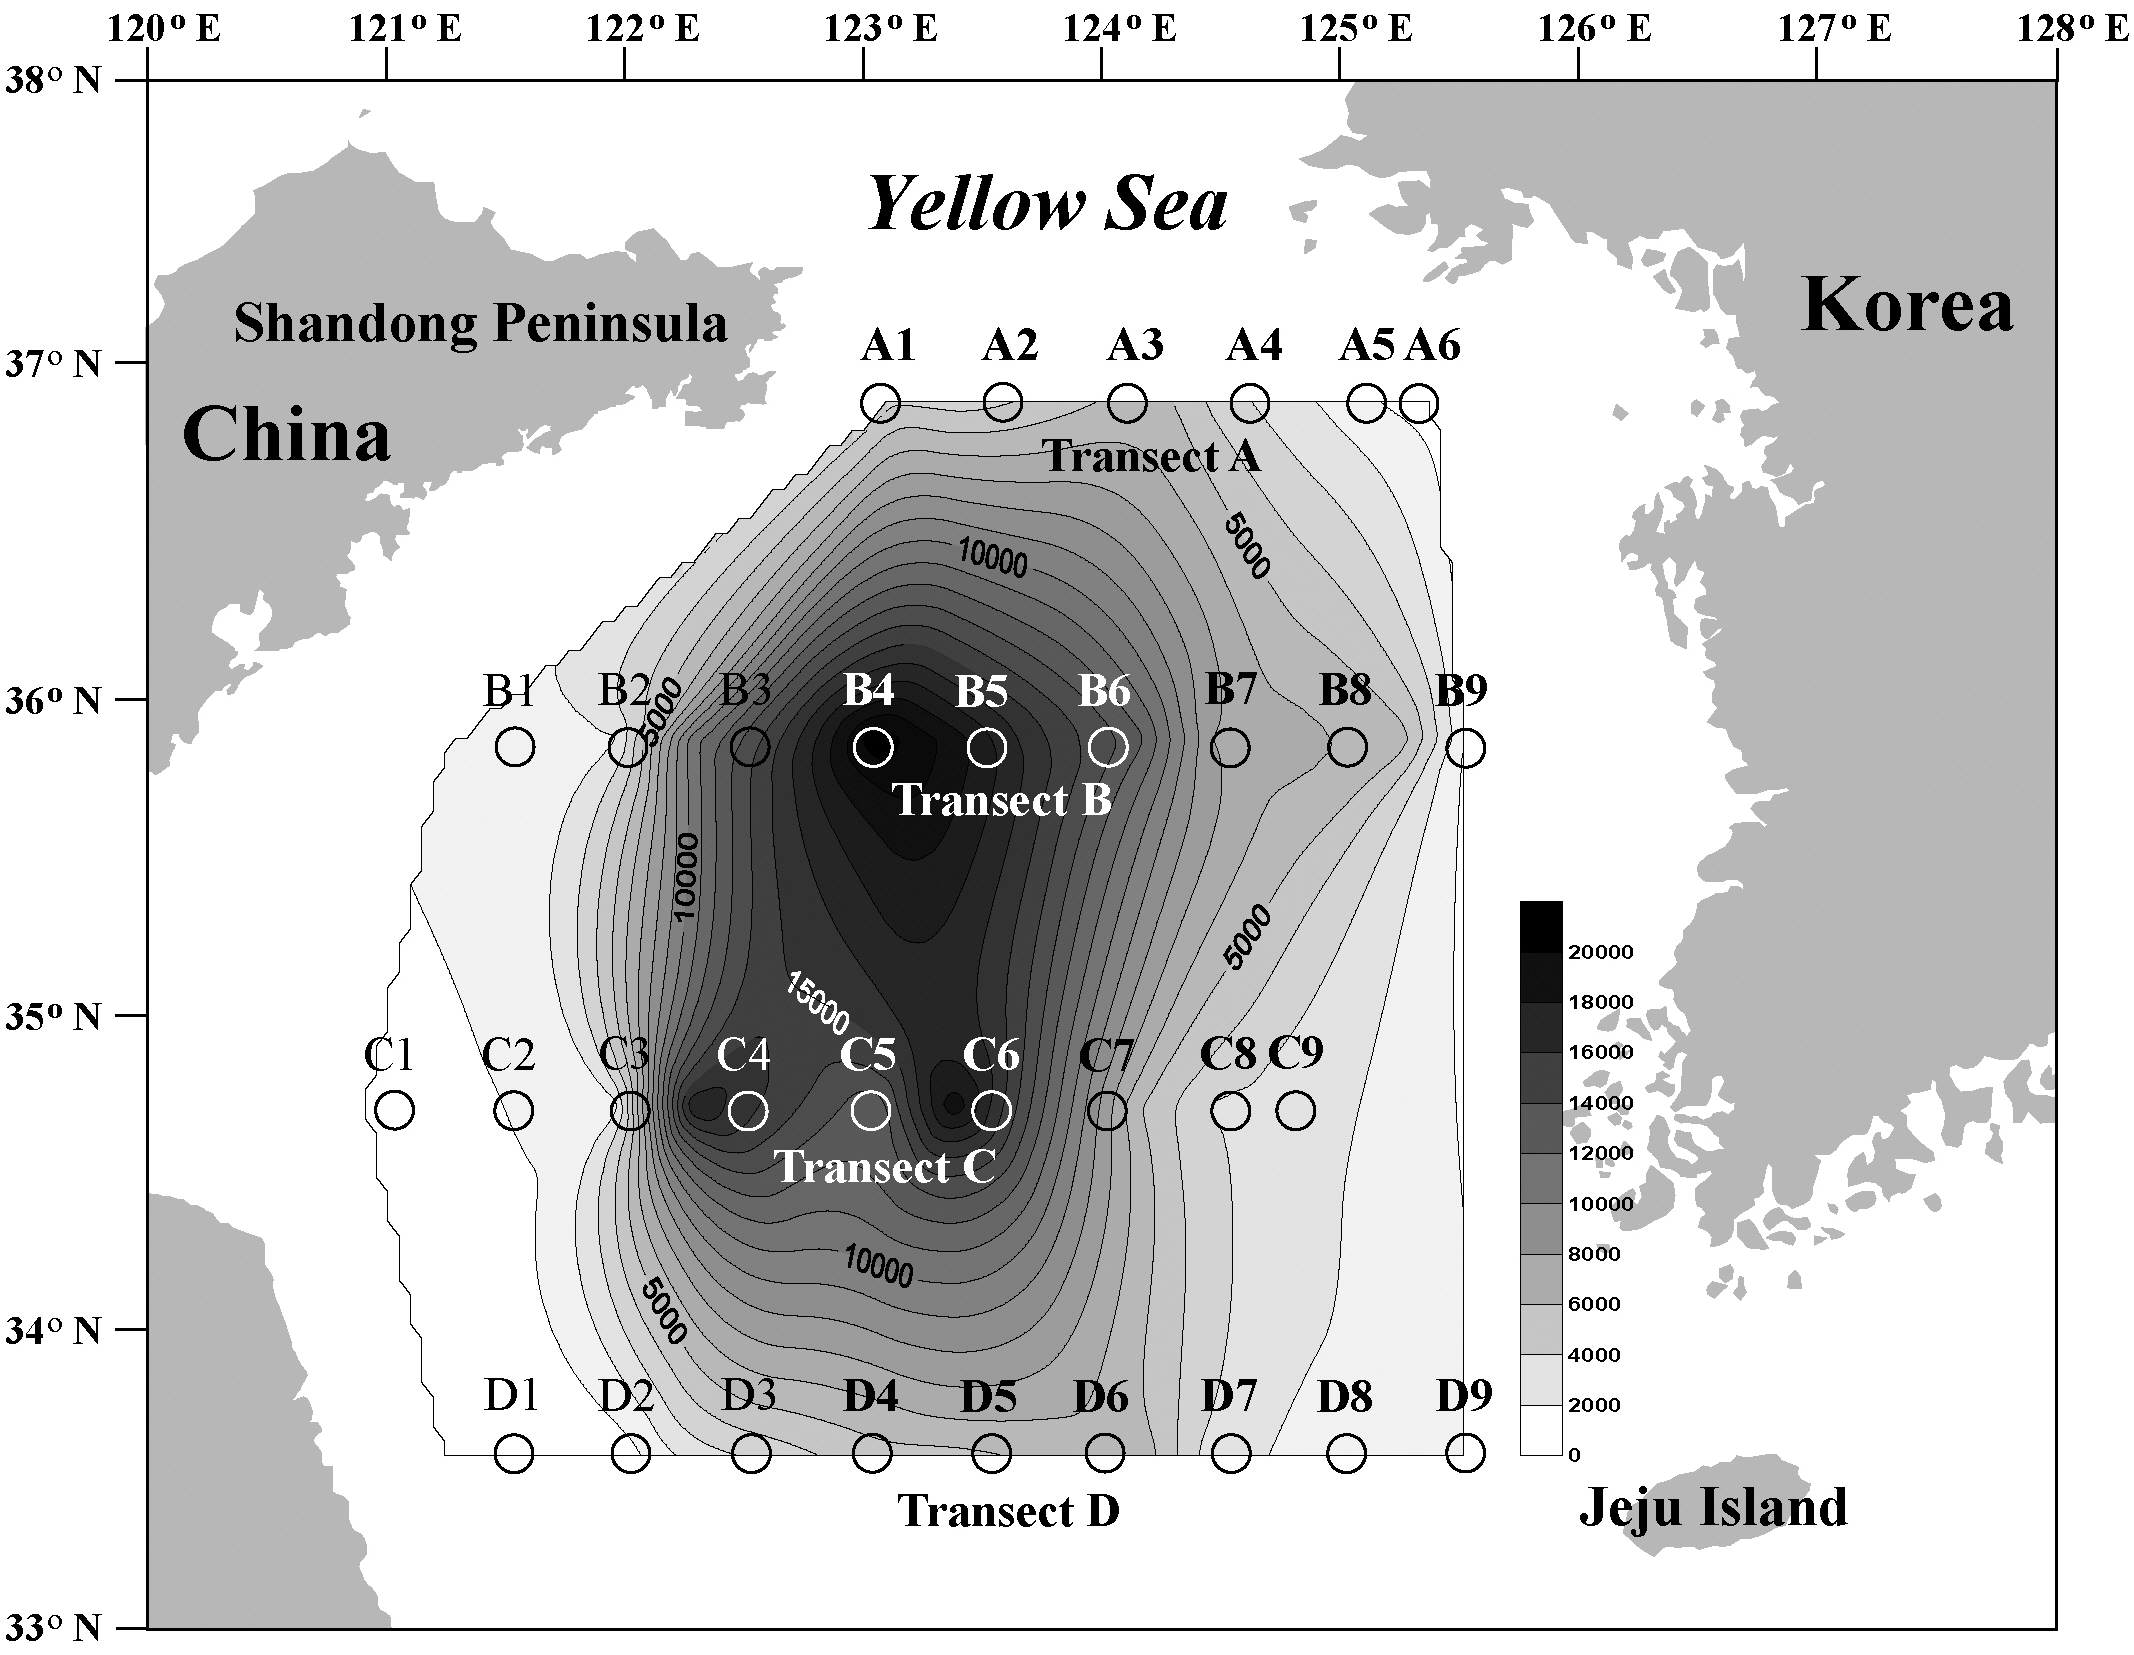 A contour map of the spatial distribution of all dinoflagellate cysts found in Yellow Sea surface sediments. Contour lines are increments of 1000 cells g-1 dry weight.